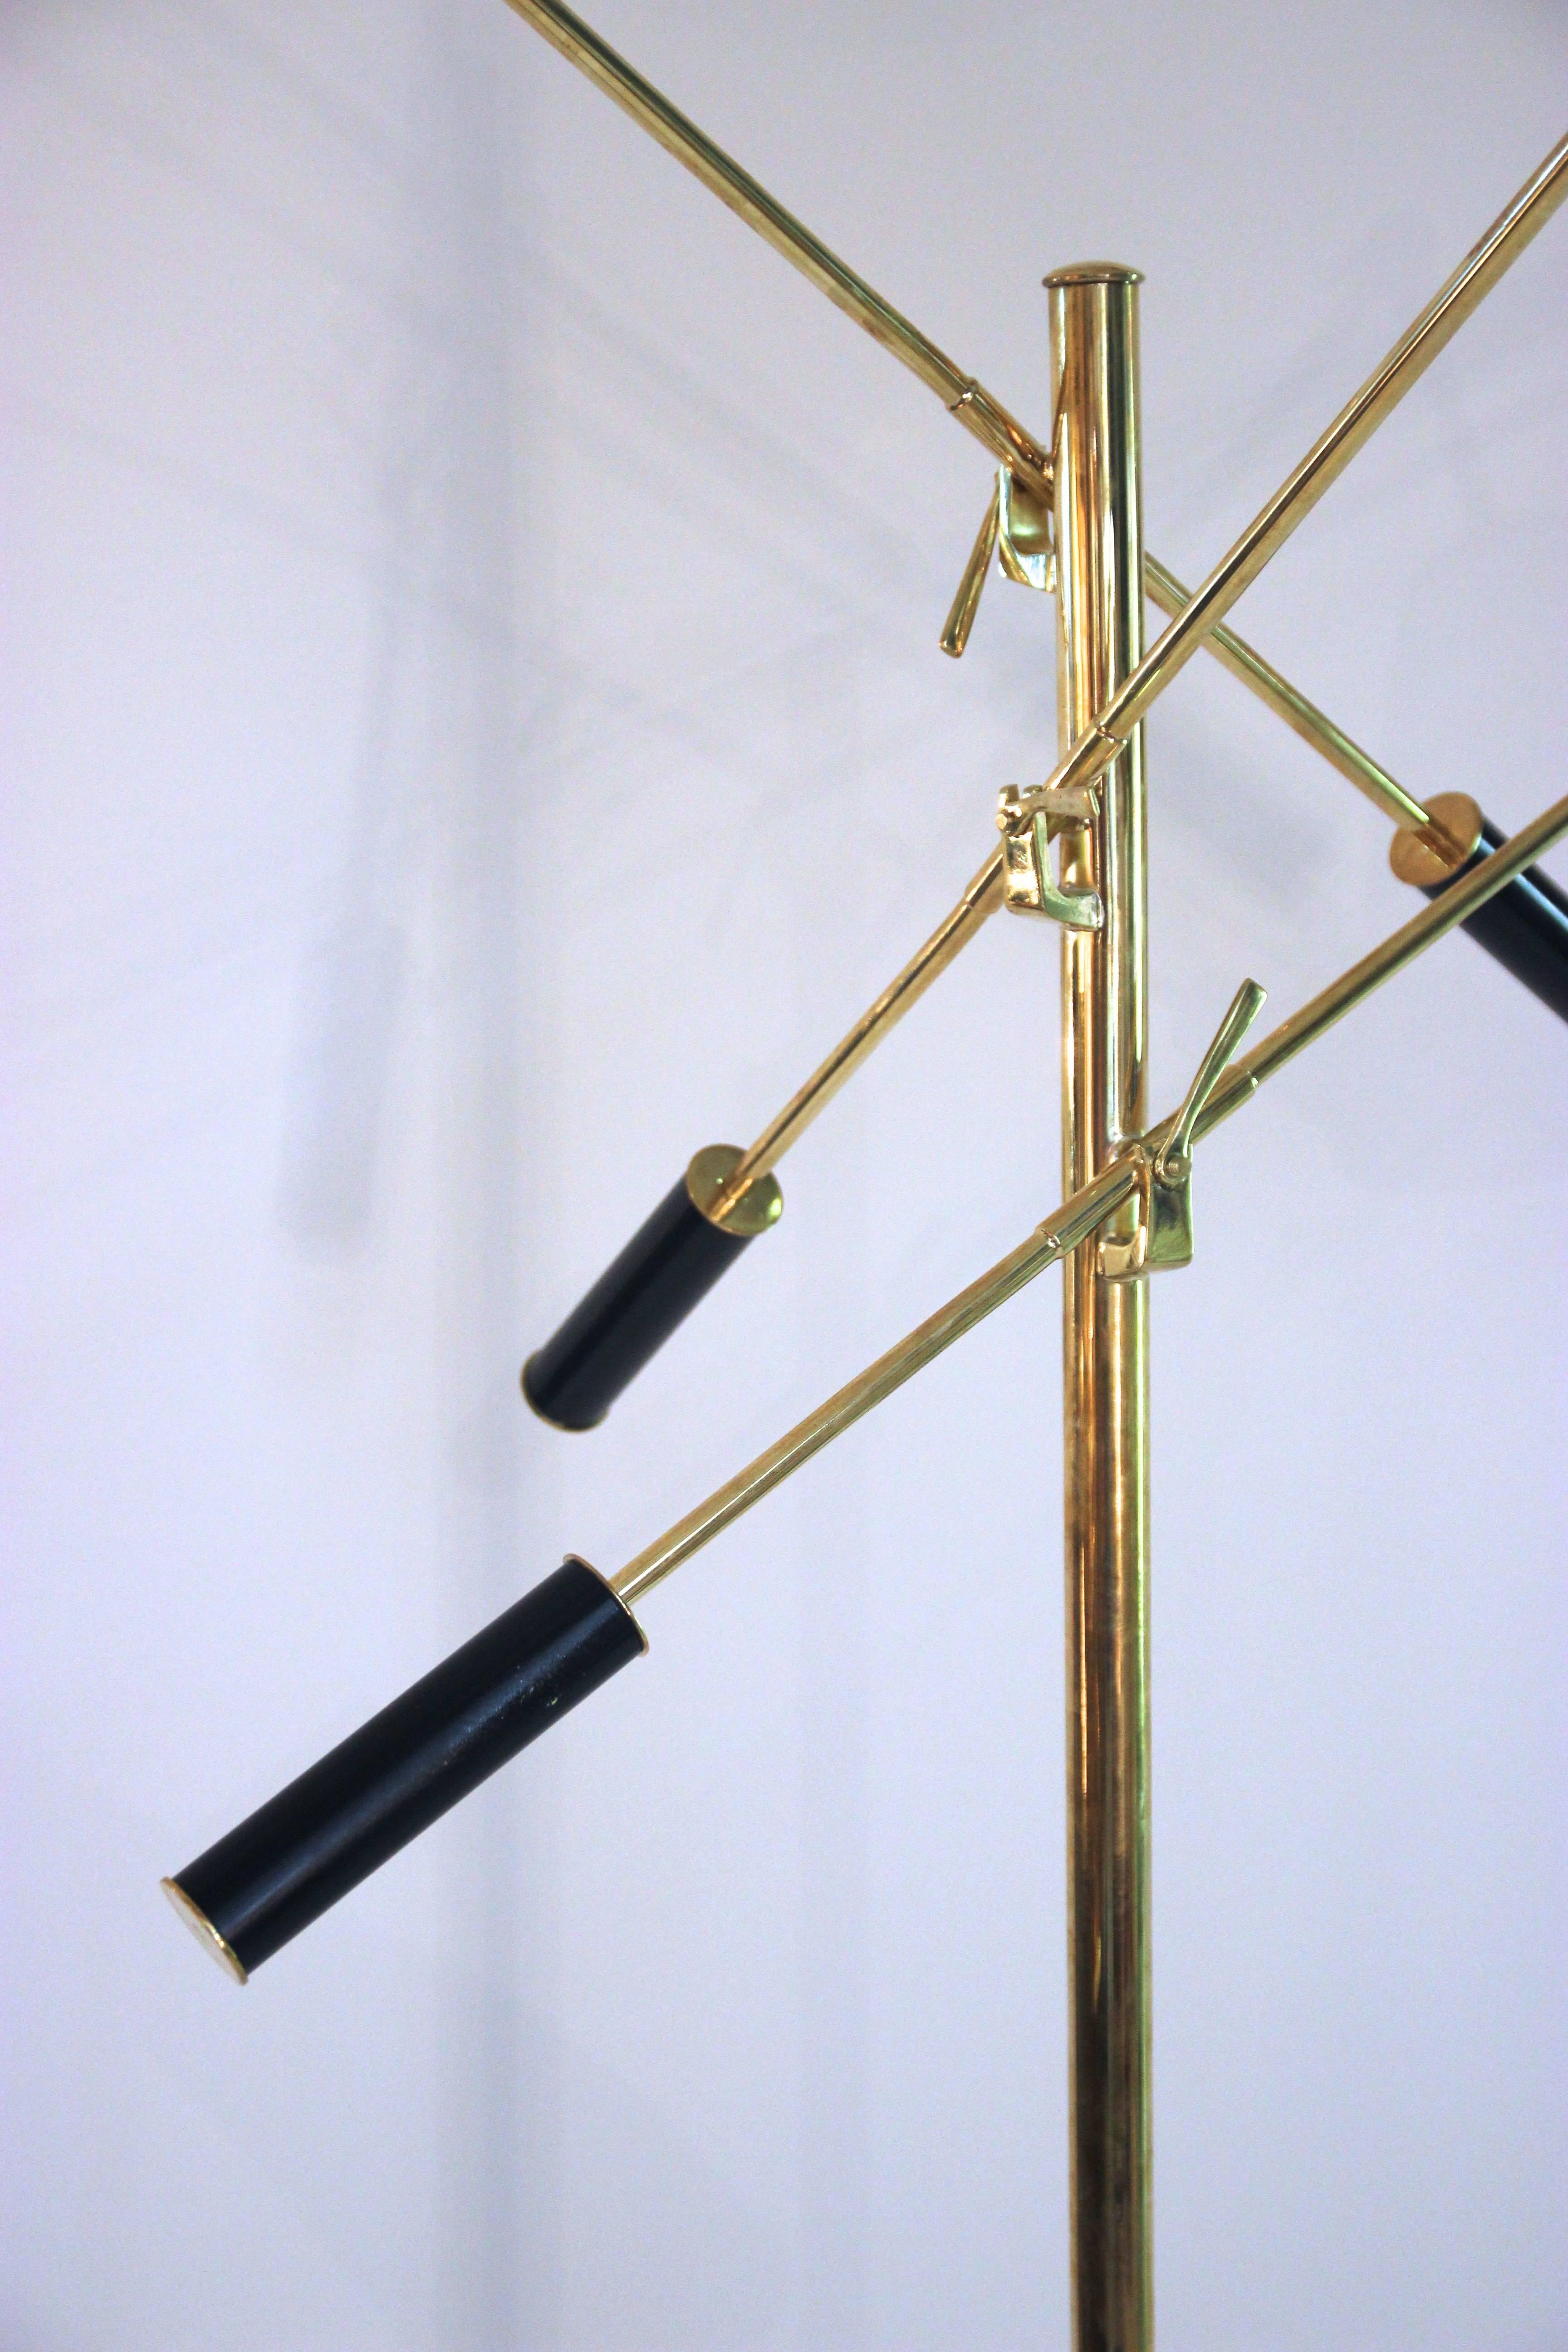 Angelo Lelli,
Triennial floor lamp, signed,
Brass and lacquered sheet,
circa 1980, Italy.
Measures: Height: 2m20, maximum width: 1m10.